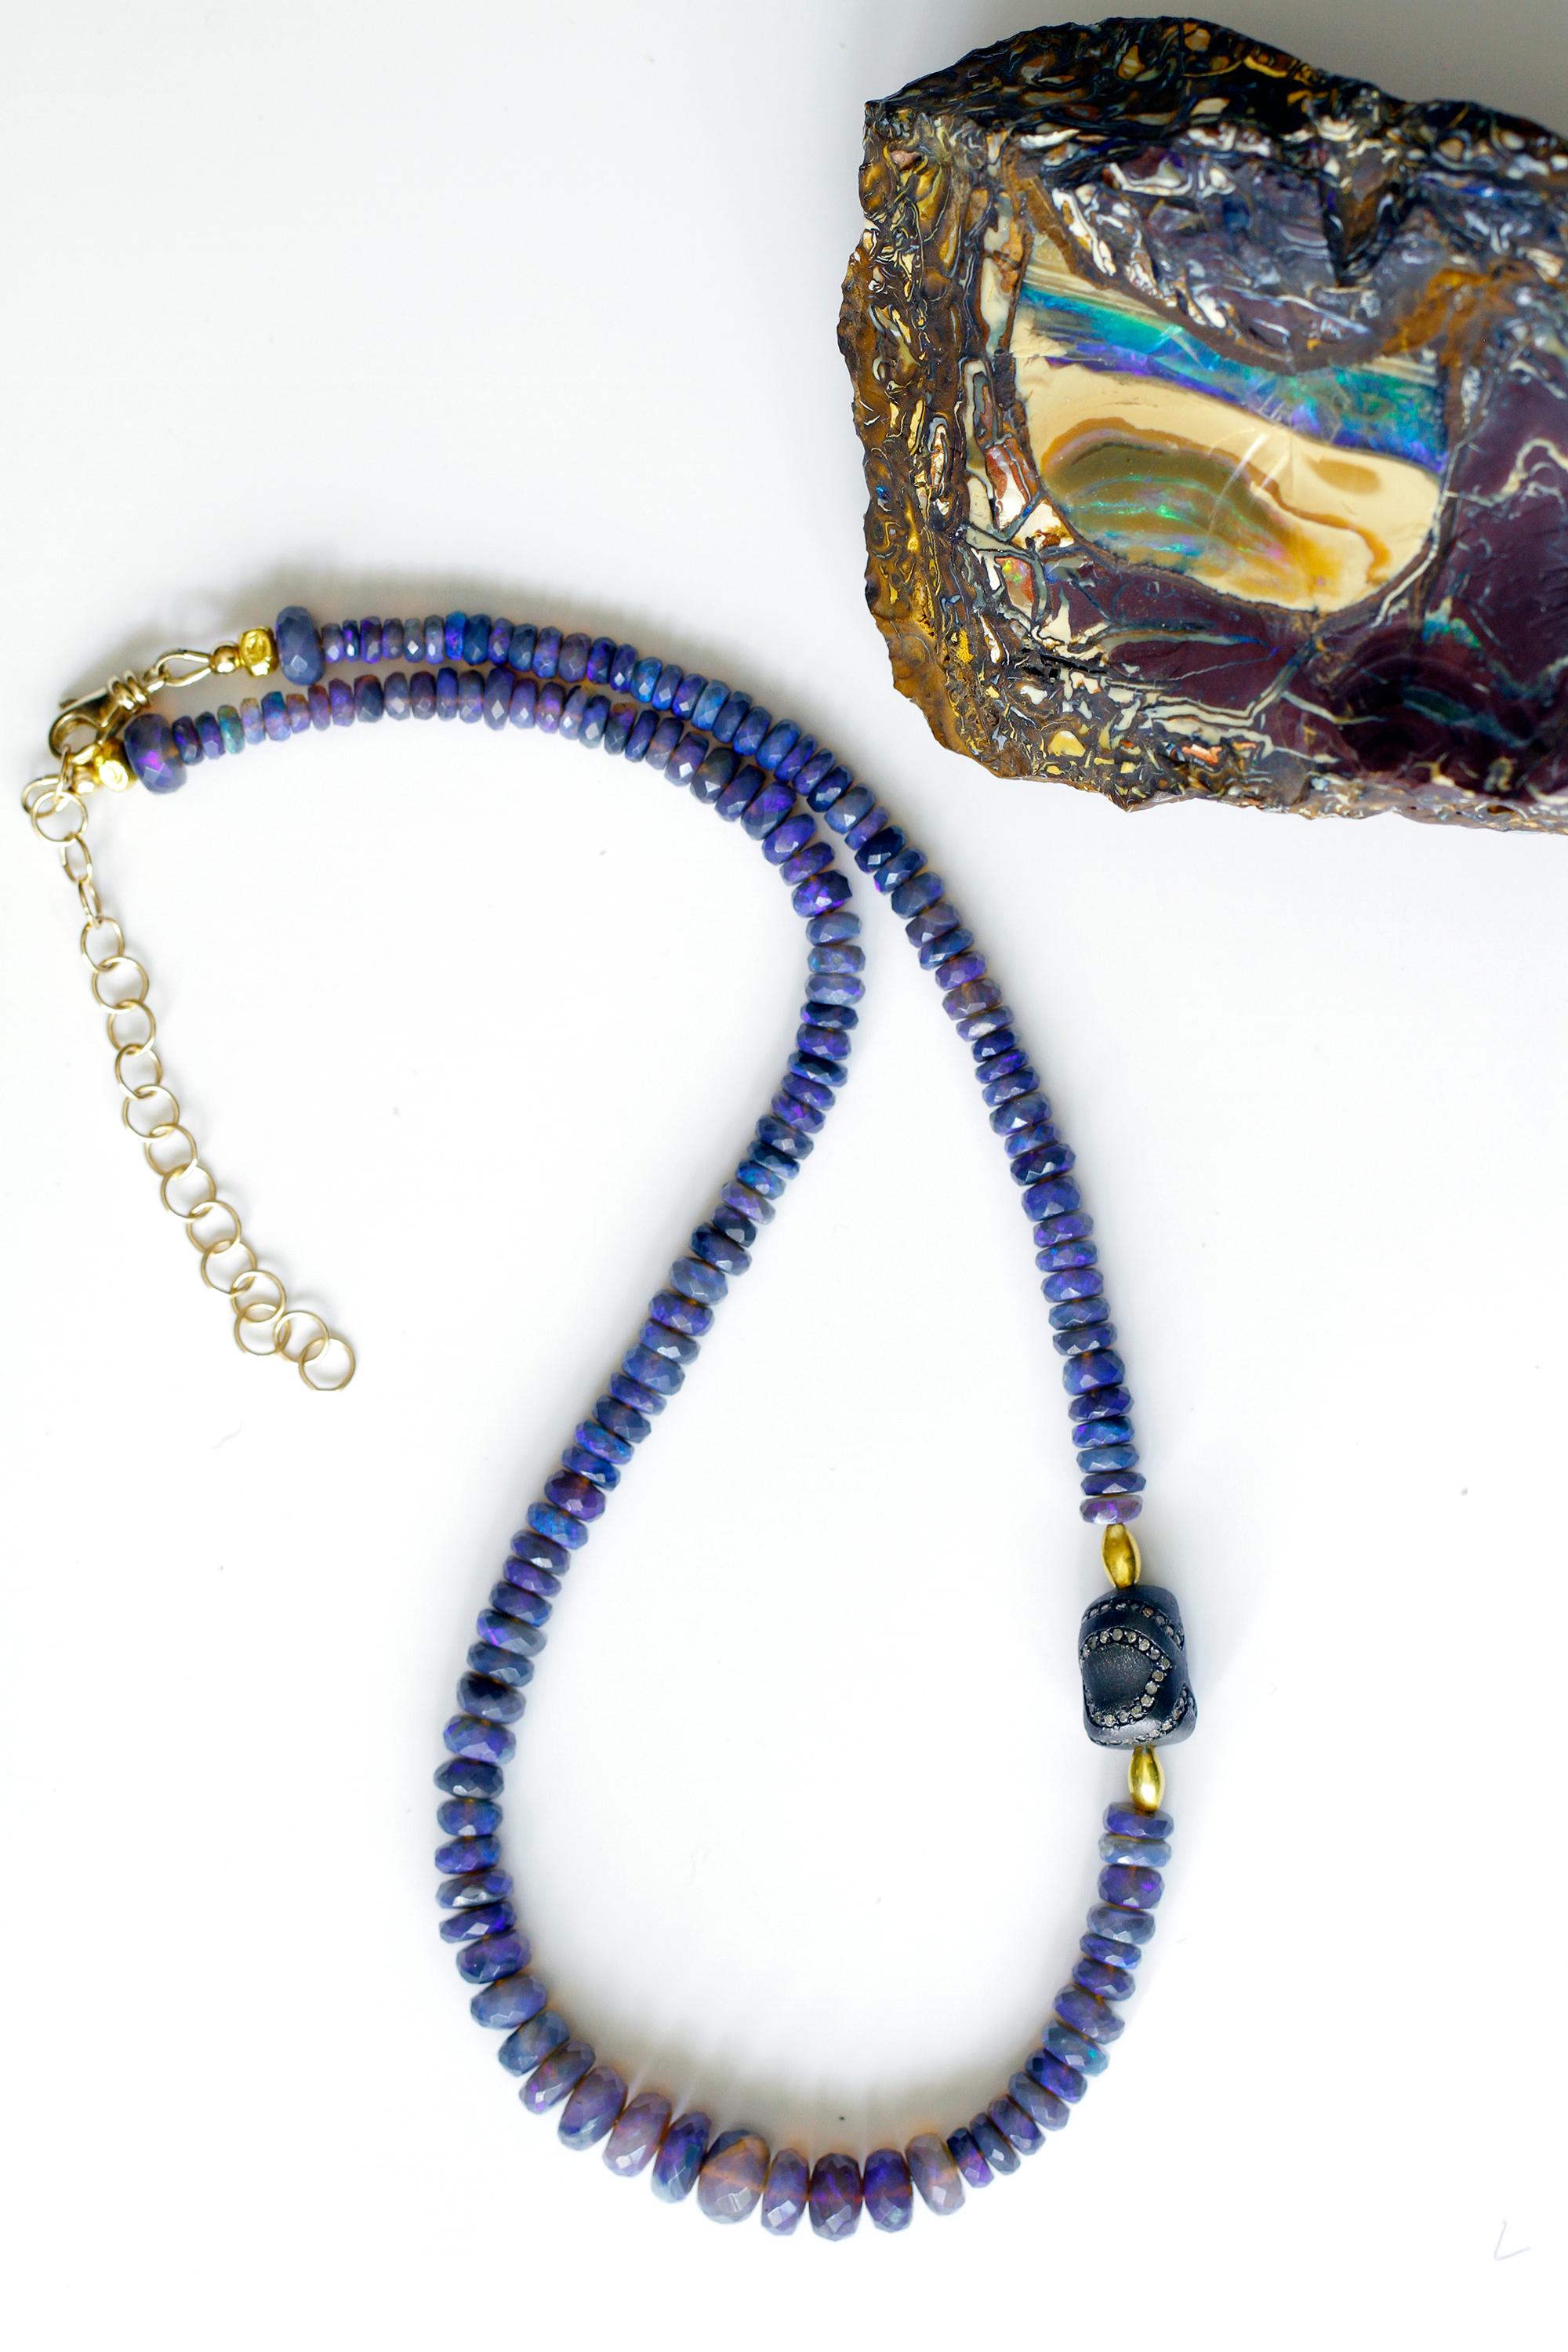 A beautiful strand of black opal beads, purplish blue in color with a diamond encrusted oxidized bead and 18k gold beads.  Black opal comes from New South Wales, primarily from Lightening Ridge.  Black manganese is its matrix. Where ironstone is